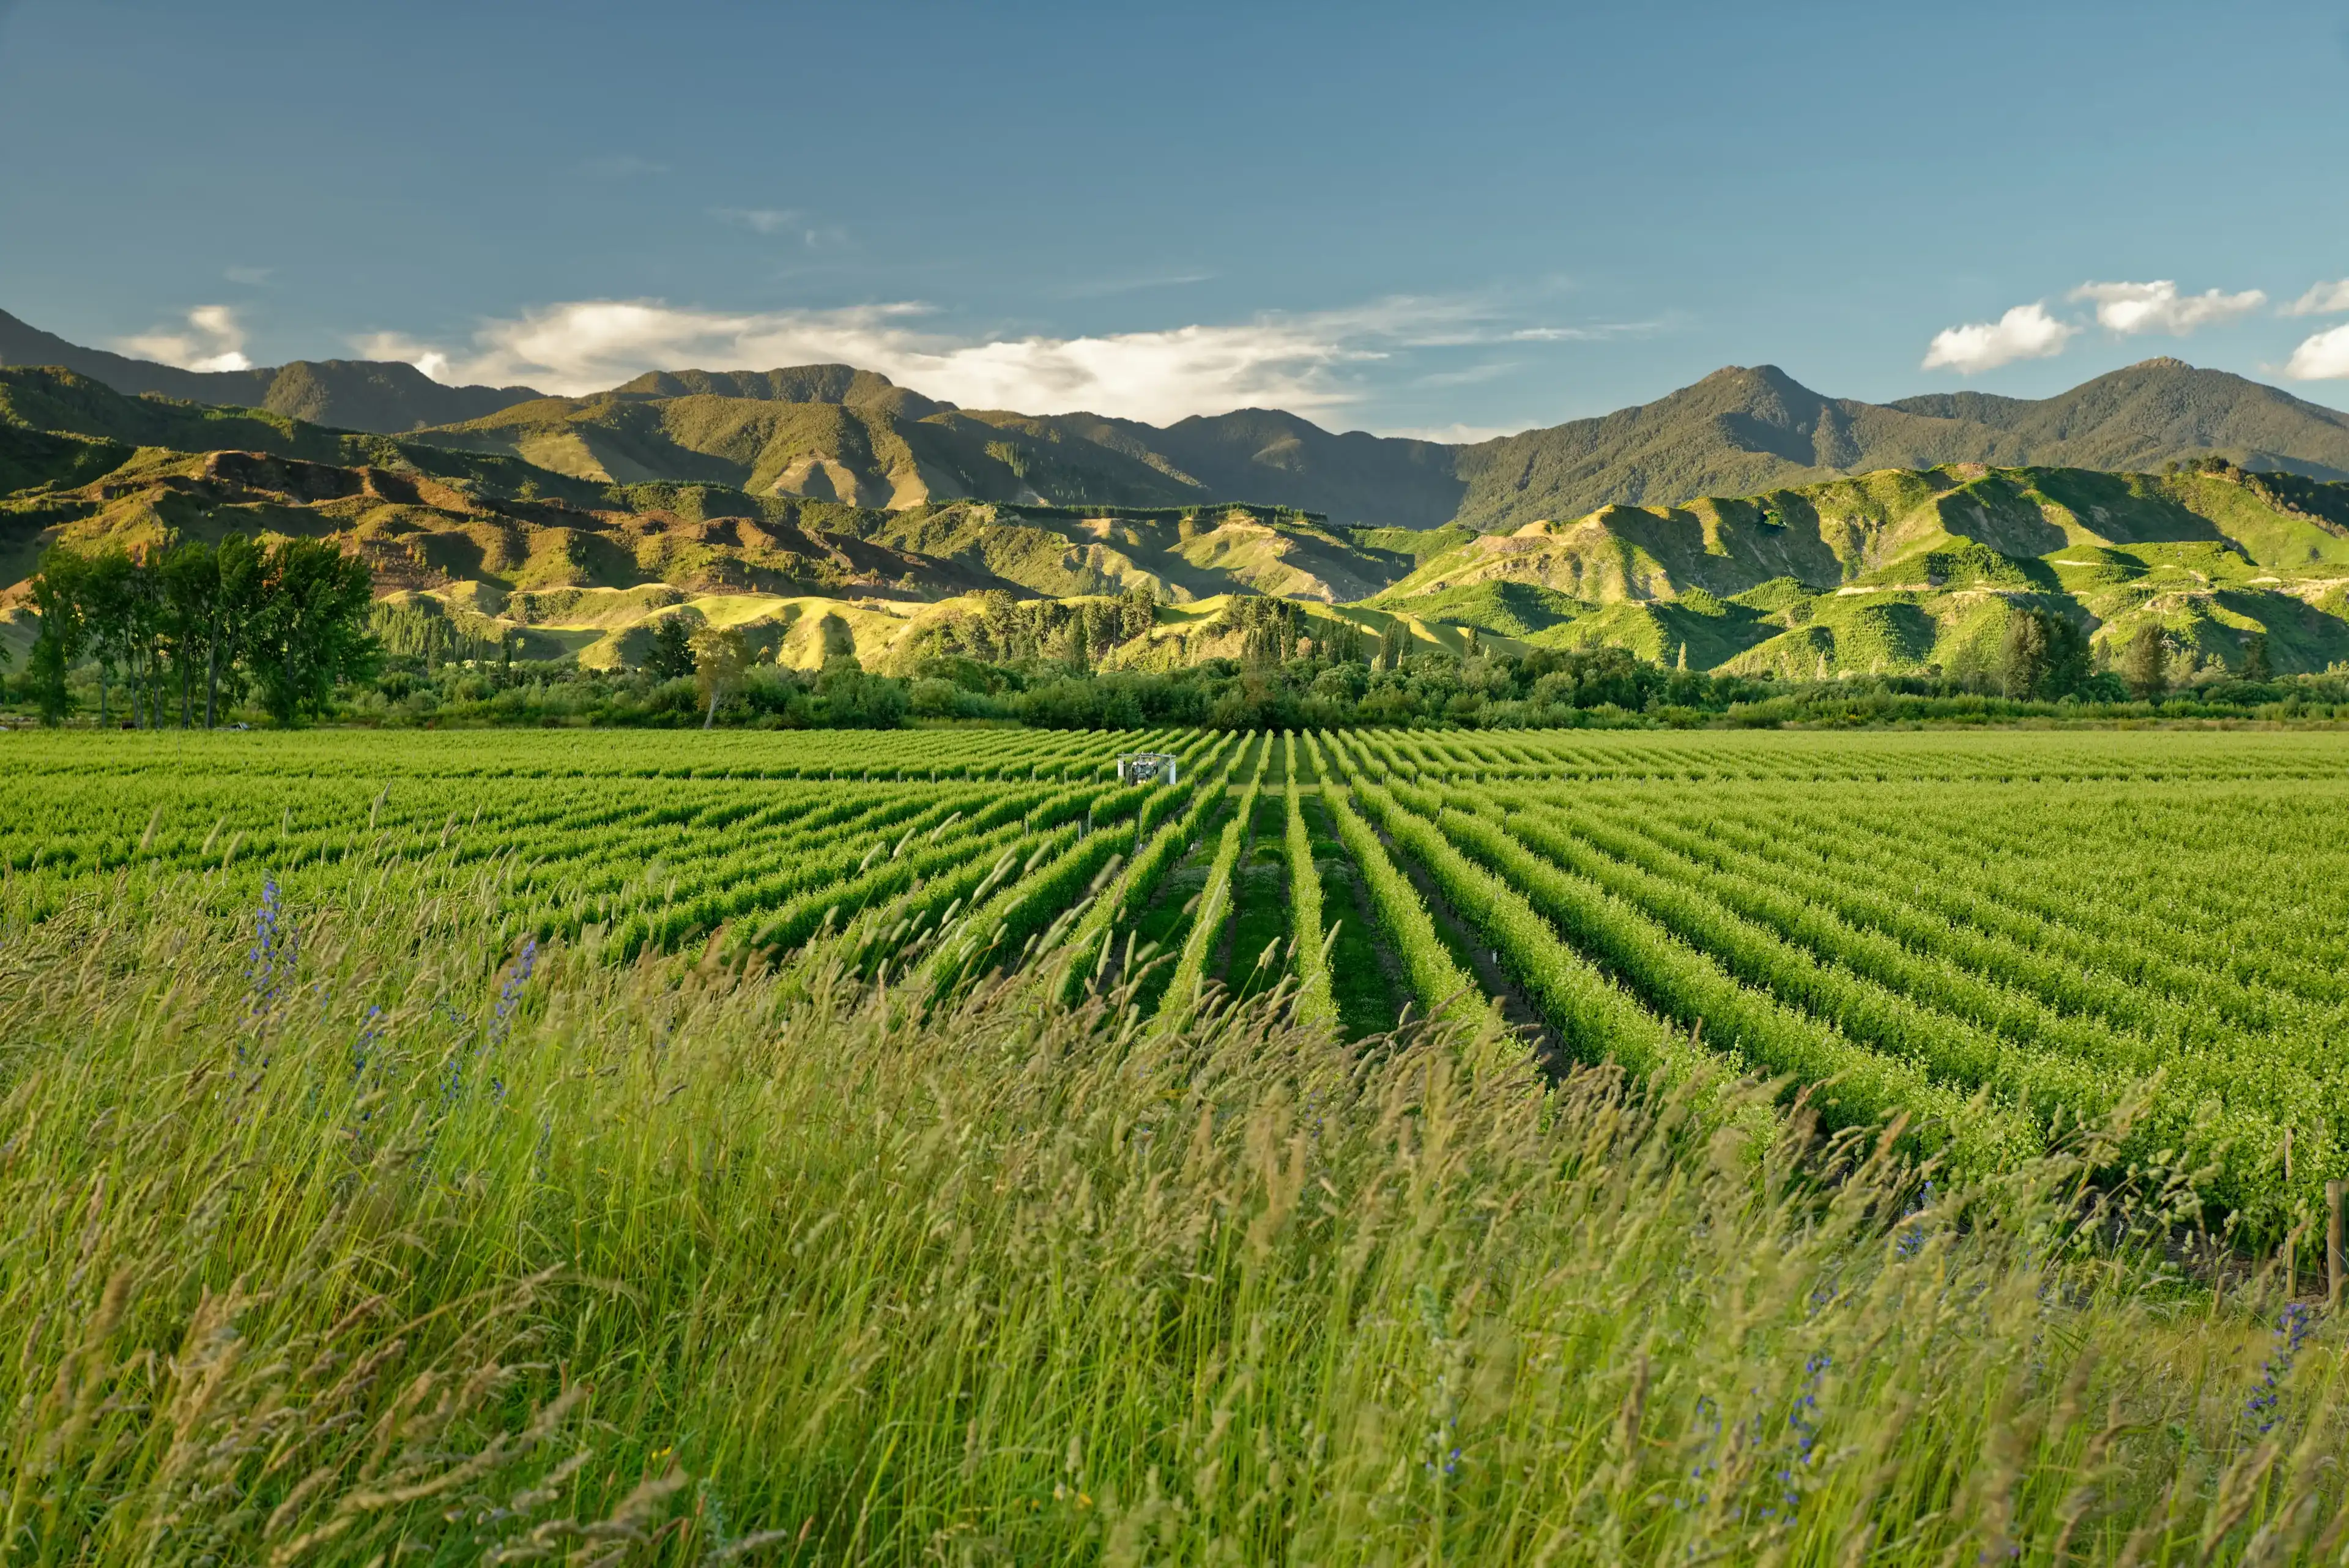 Wineyard, winery New Zealand, typical Marlborough landscape with wineyards and roads, hills and mountains.